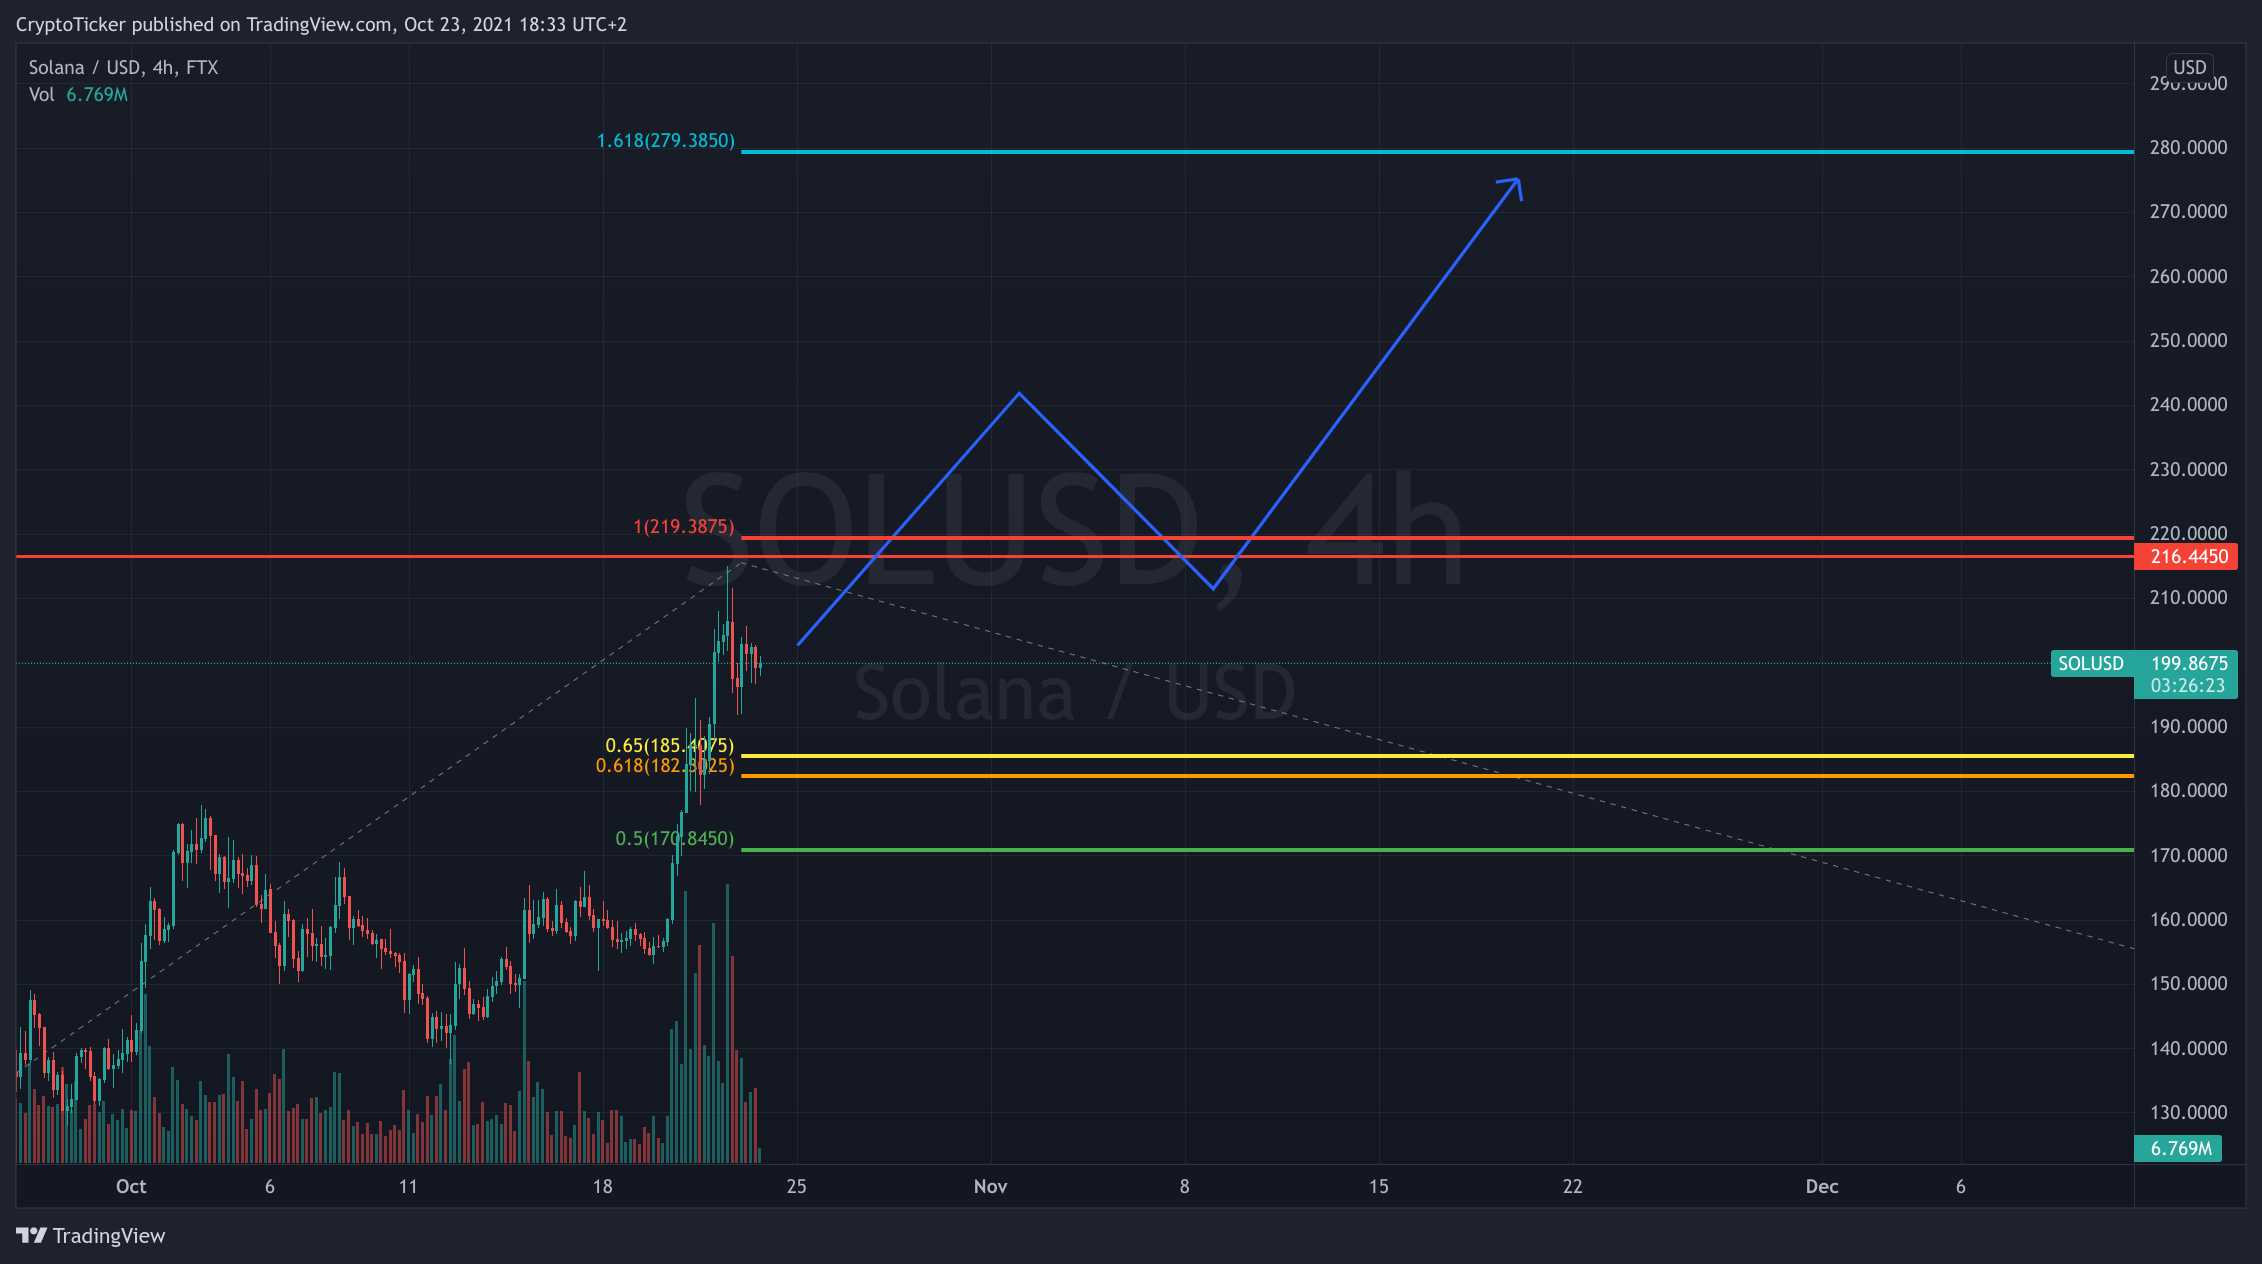 SOL/USD 4-hours chart showing a potential ATH reach for Solana Price